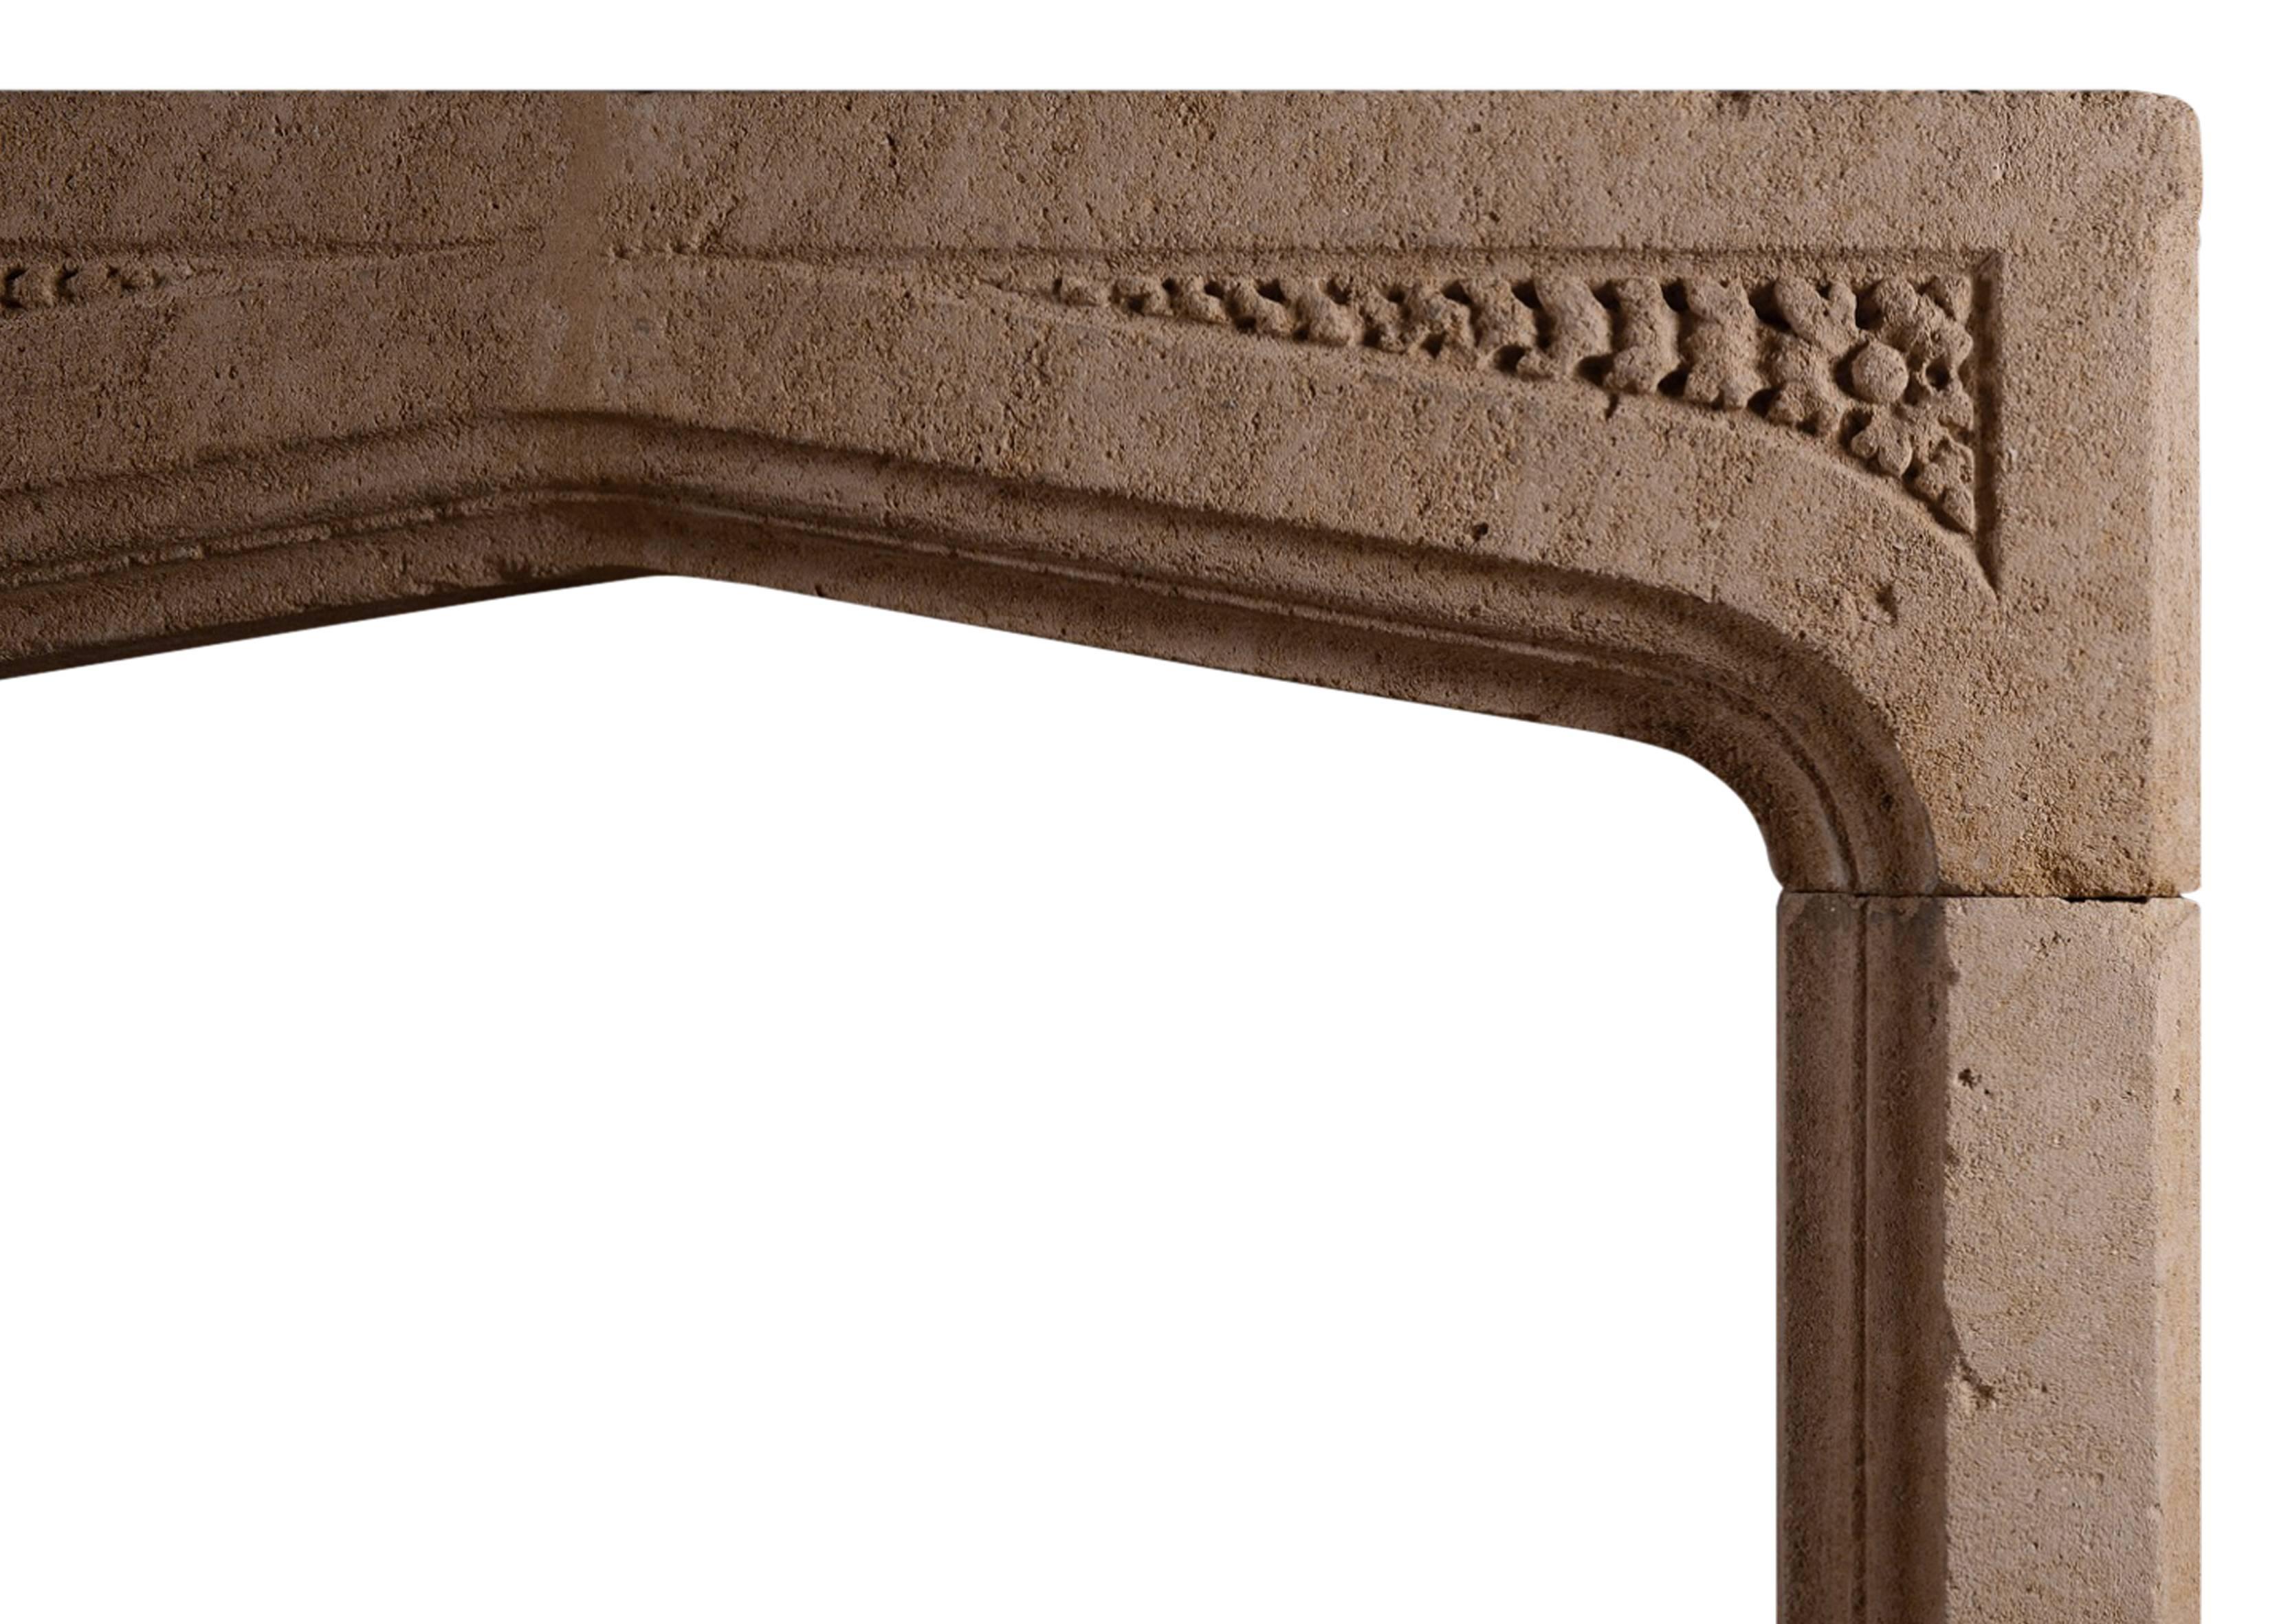 An English stone fireplace in the Gothic manner. The frieze with spandrels carved with foliage, 19th century.

N.B. May be subject to an extended lead time.

Measurements:
Shelf Width: 1400 mm / 55 1/8 in
Overall Height: 1135 mm / 44 5/8 in
Opening